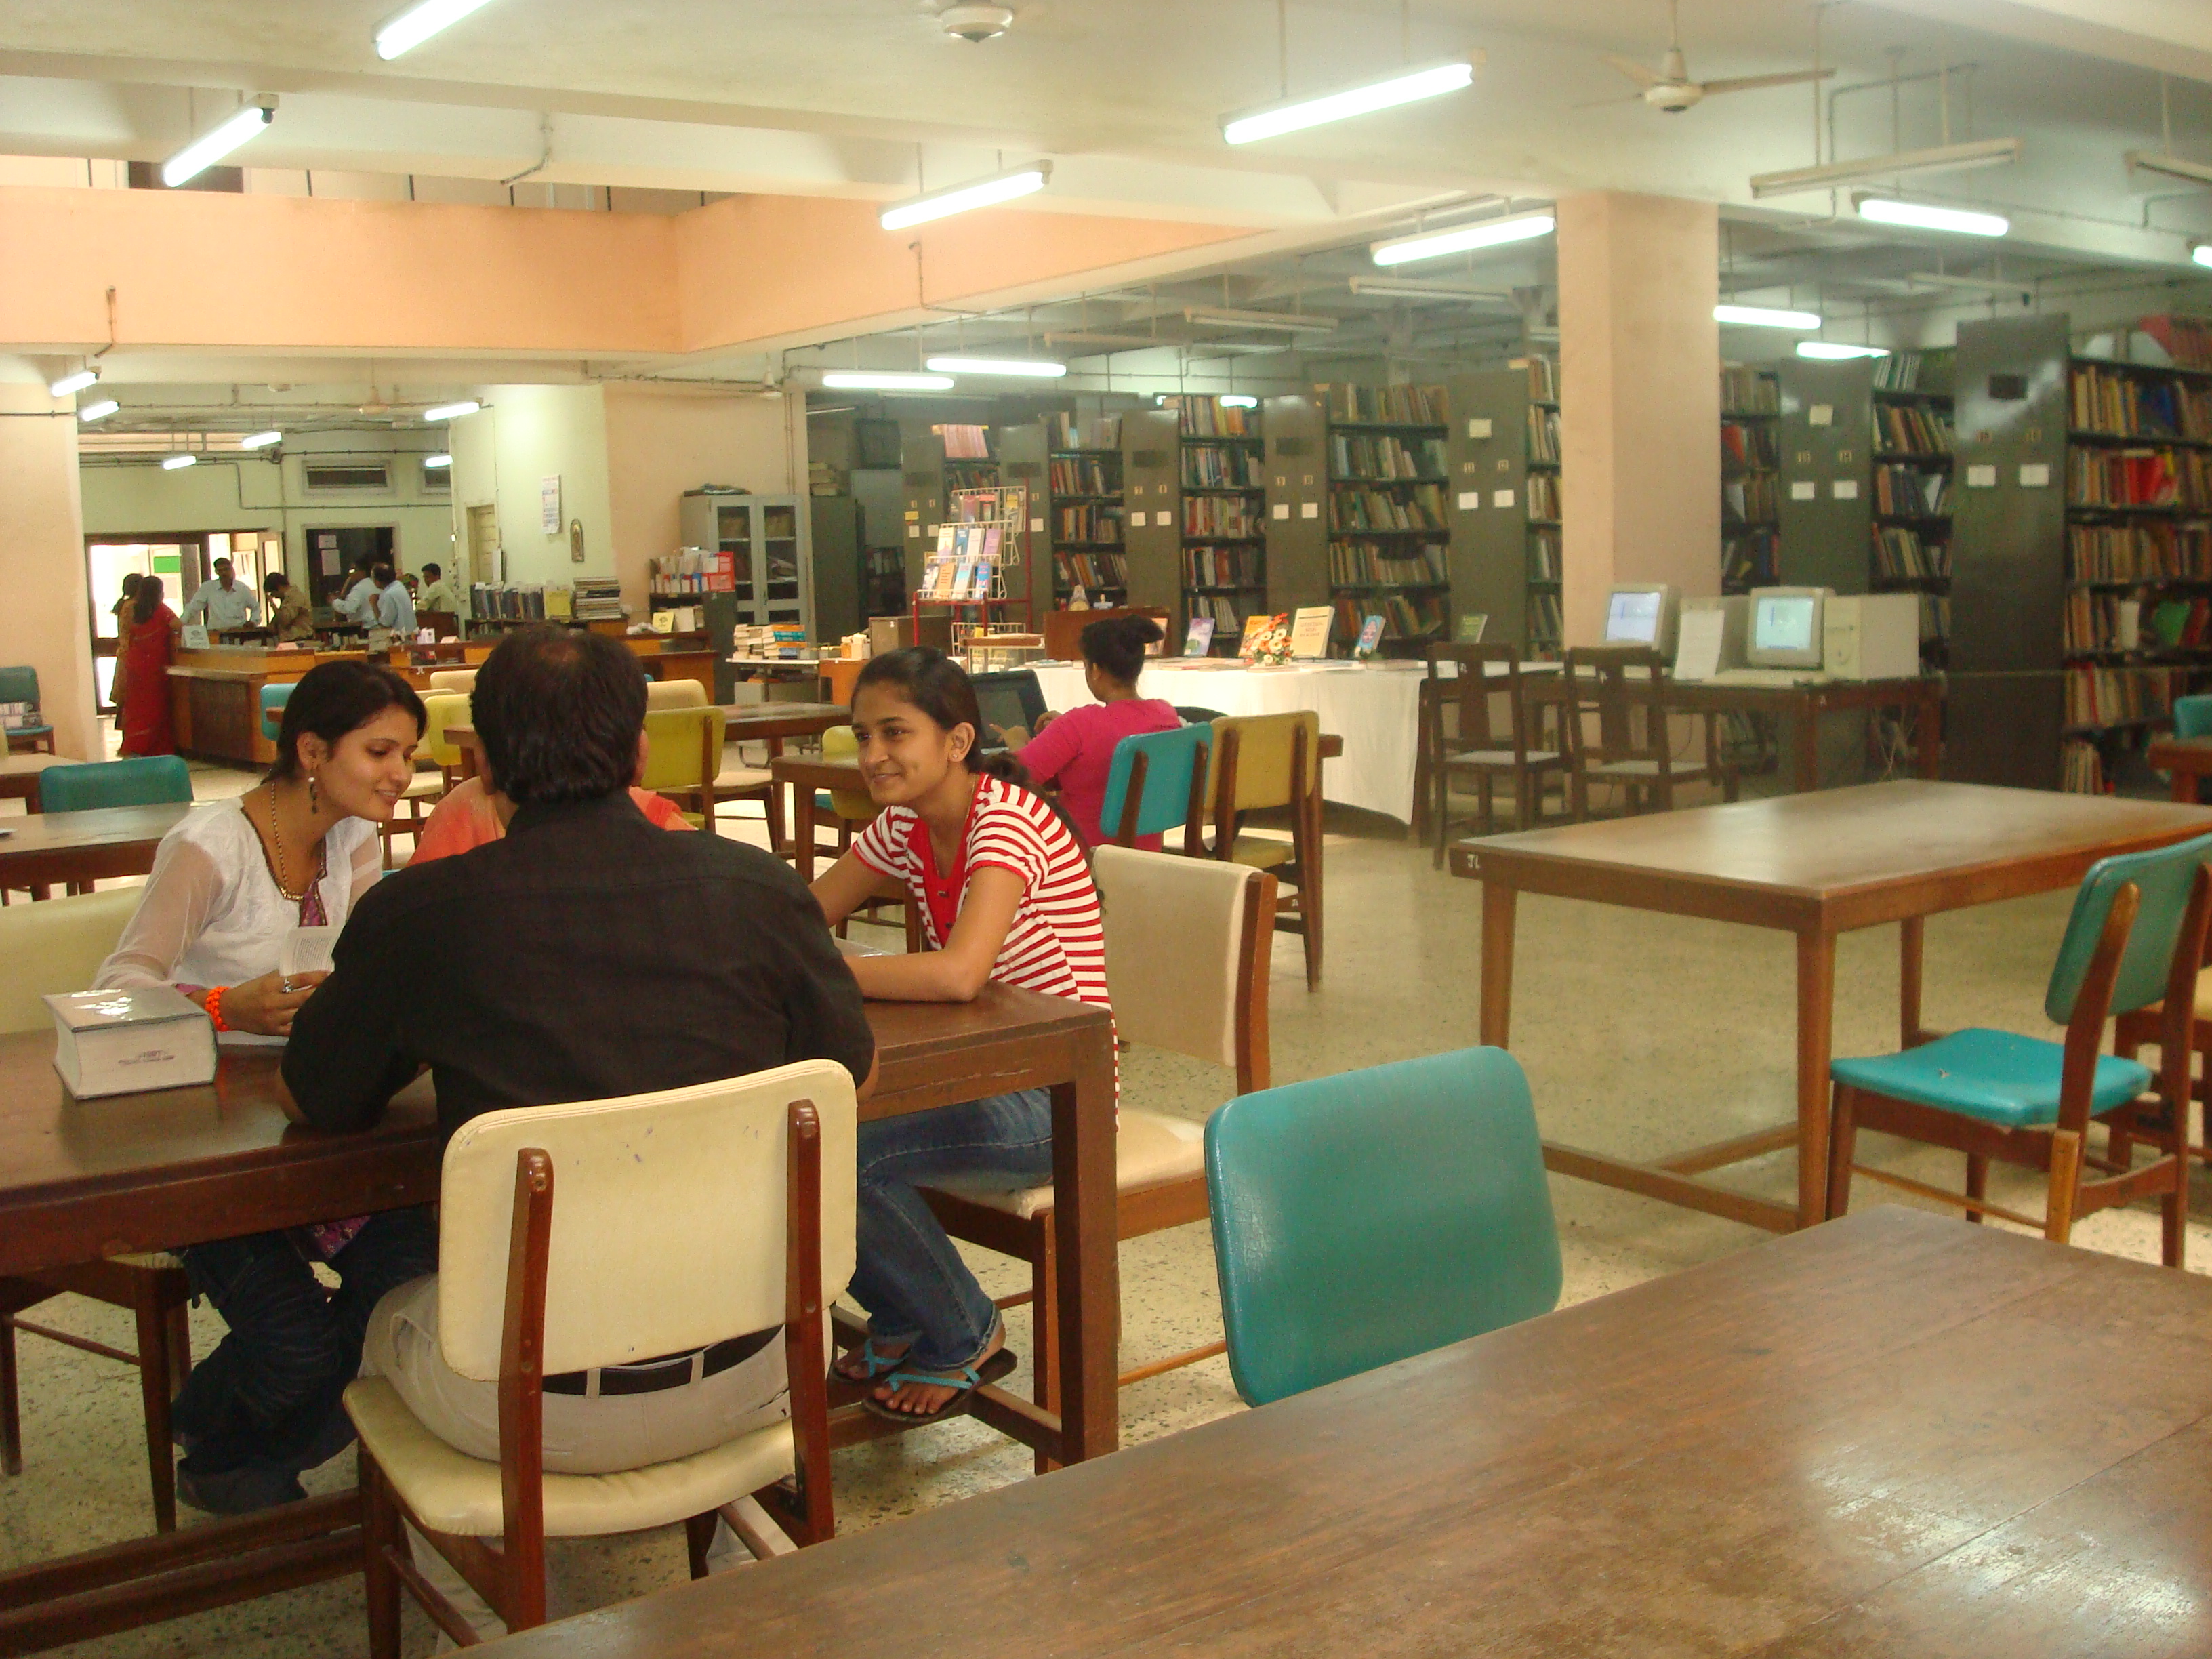 LIBRARY - The University has a well-equipped Library and Reading Room in the Composite Building.